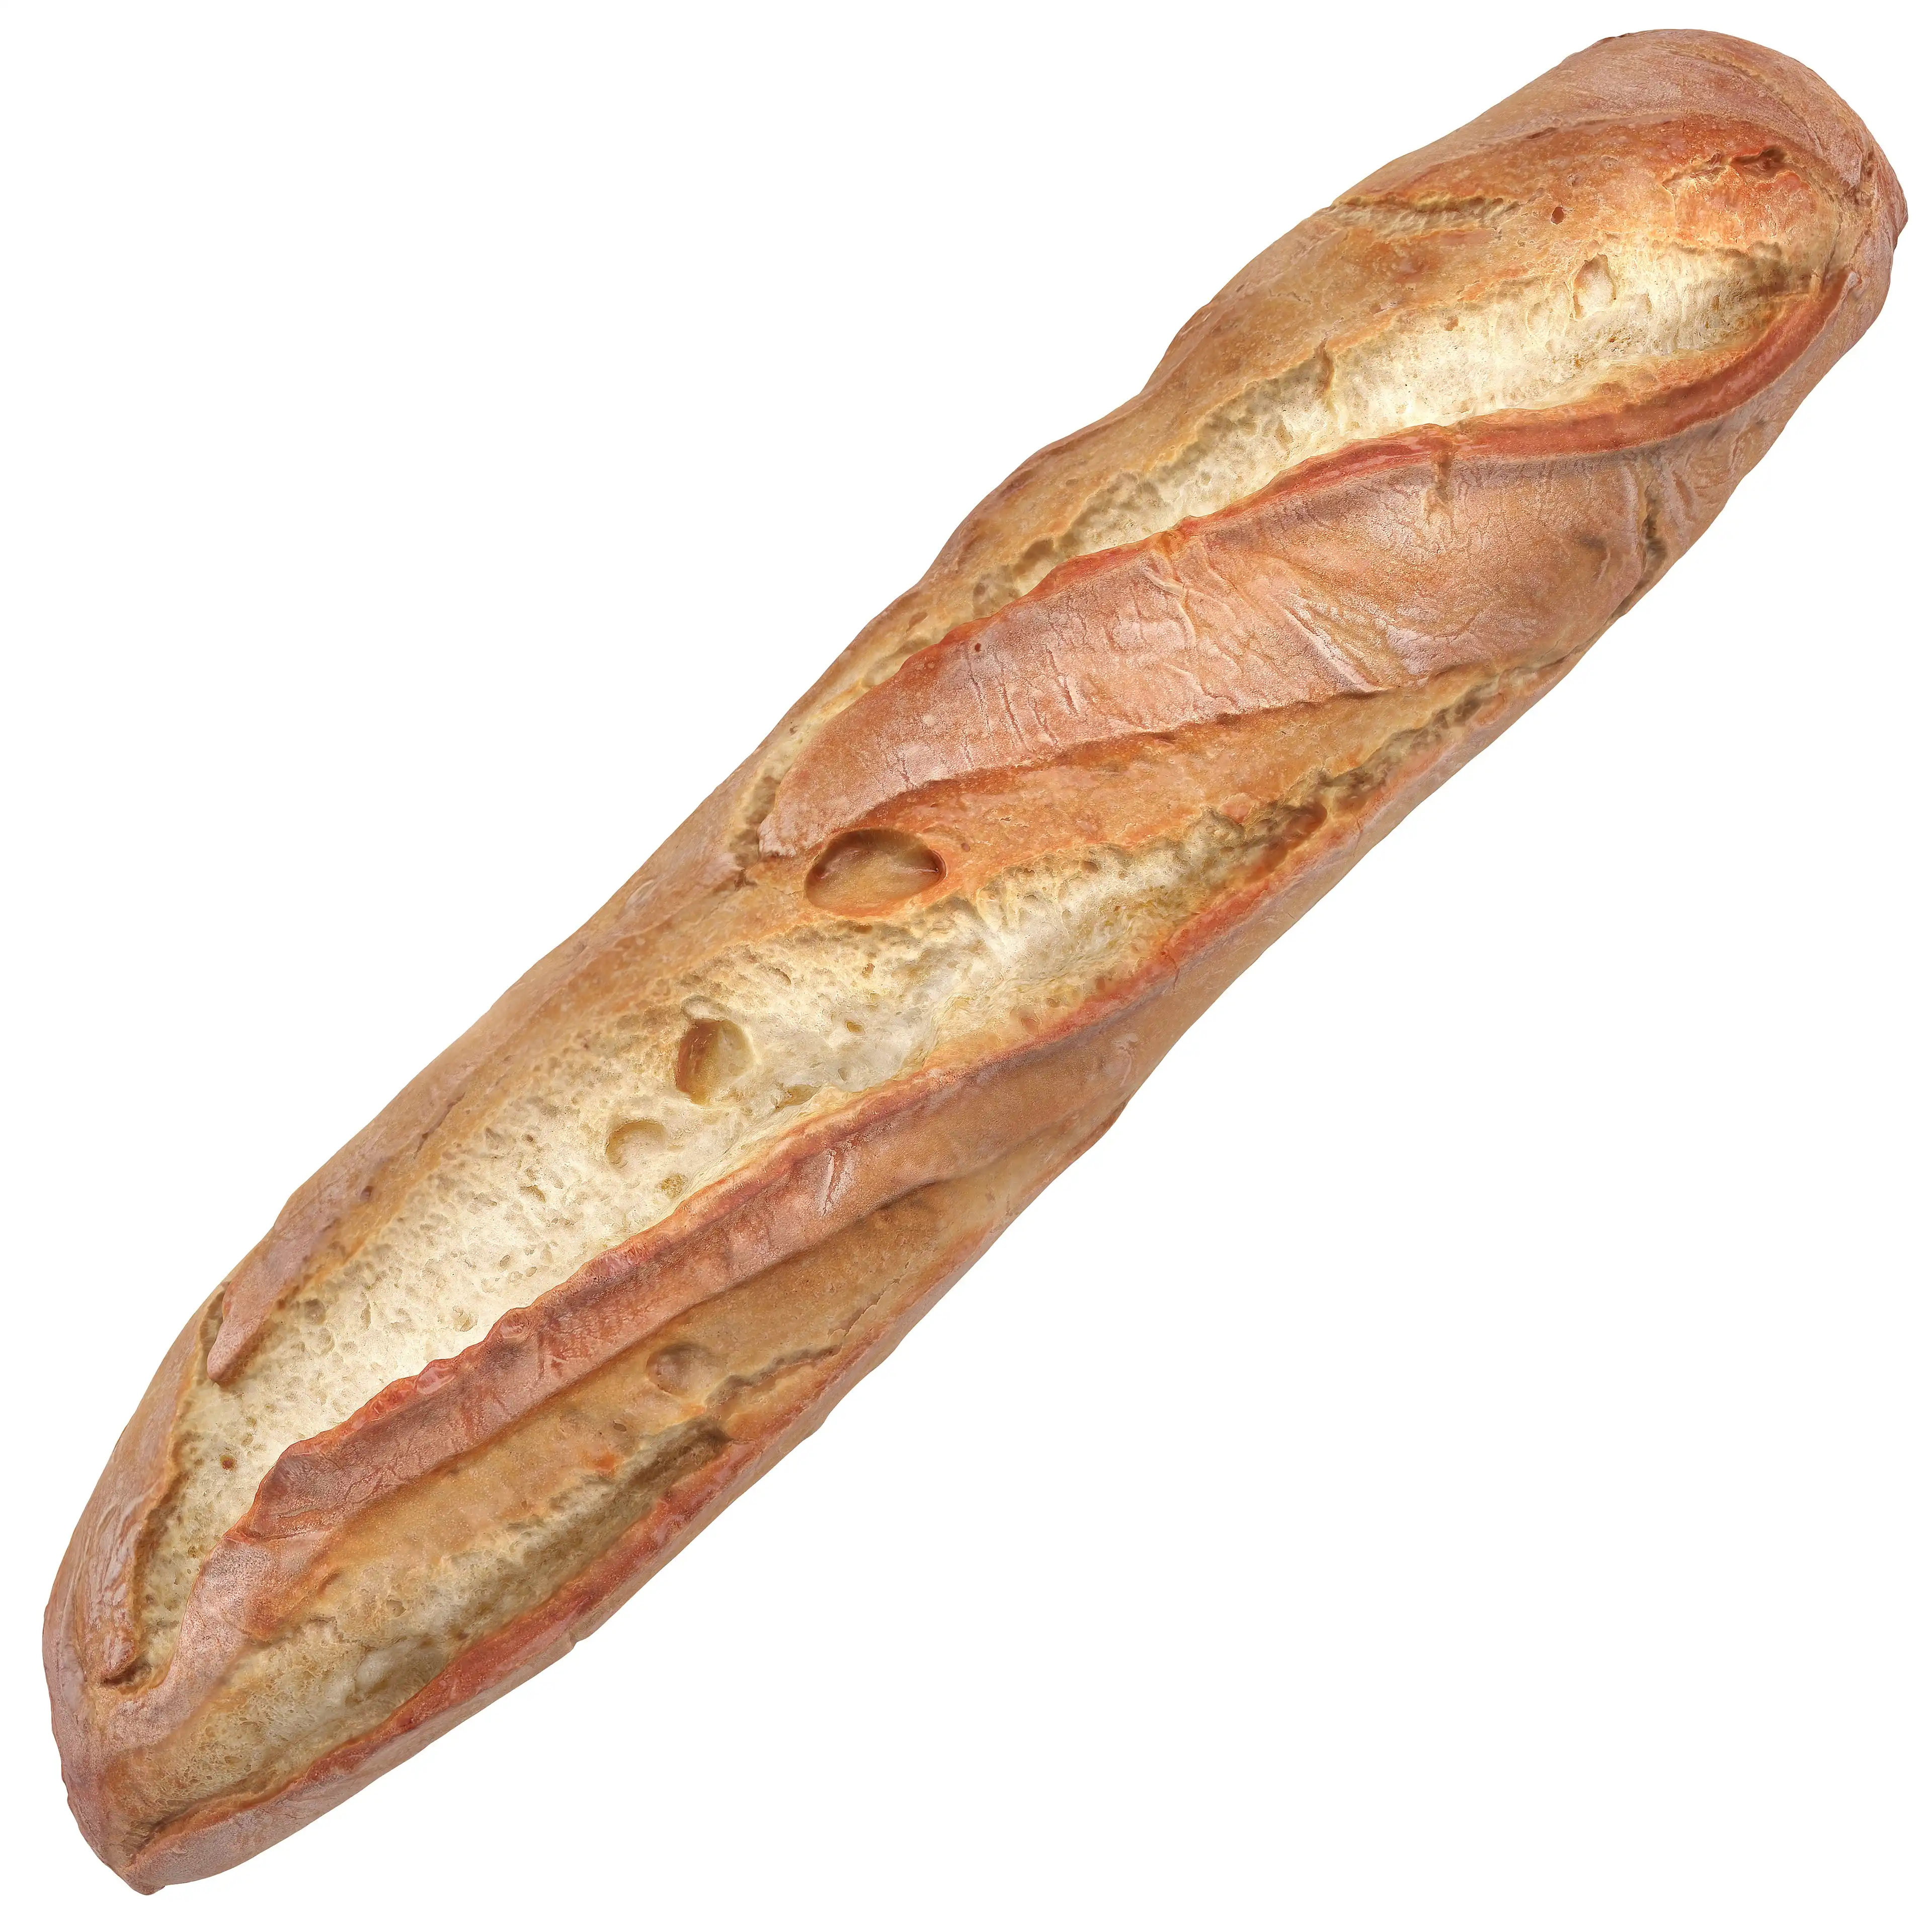 Photorealistic scanned 3d model of french bread - baguette.